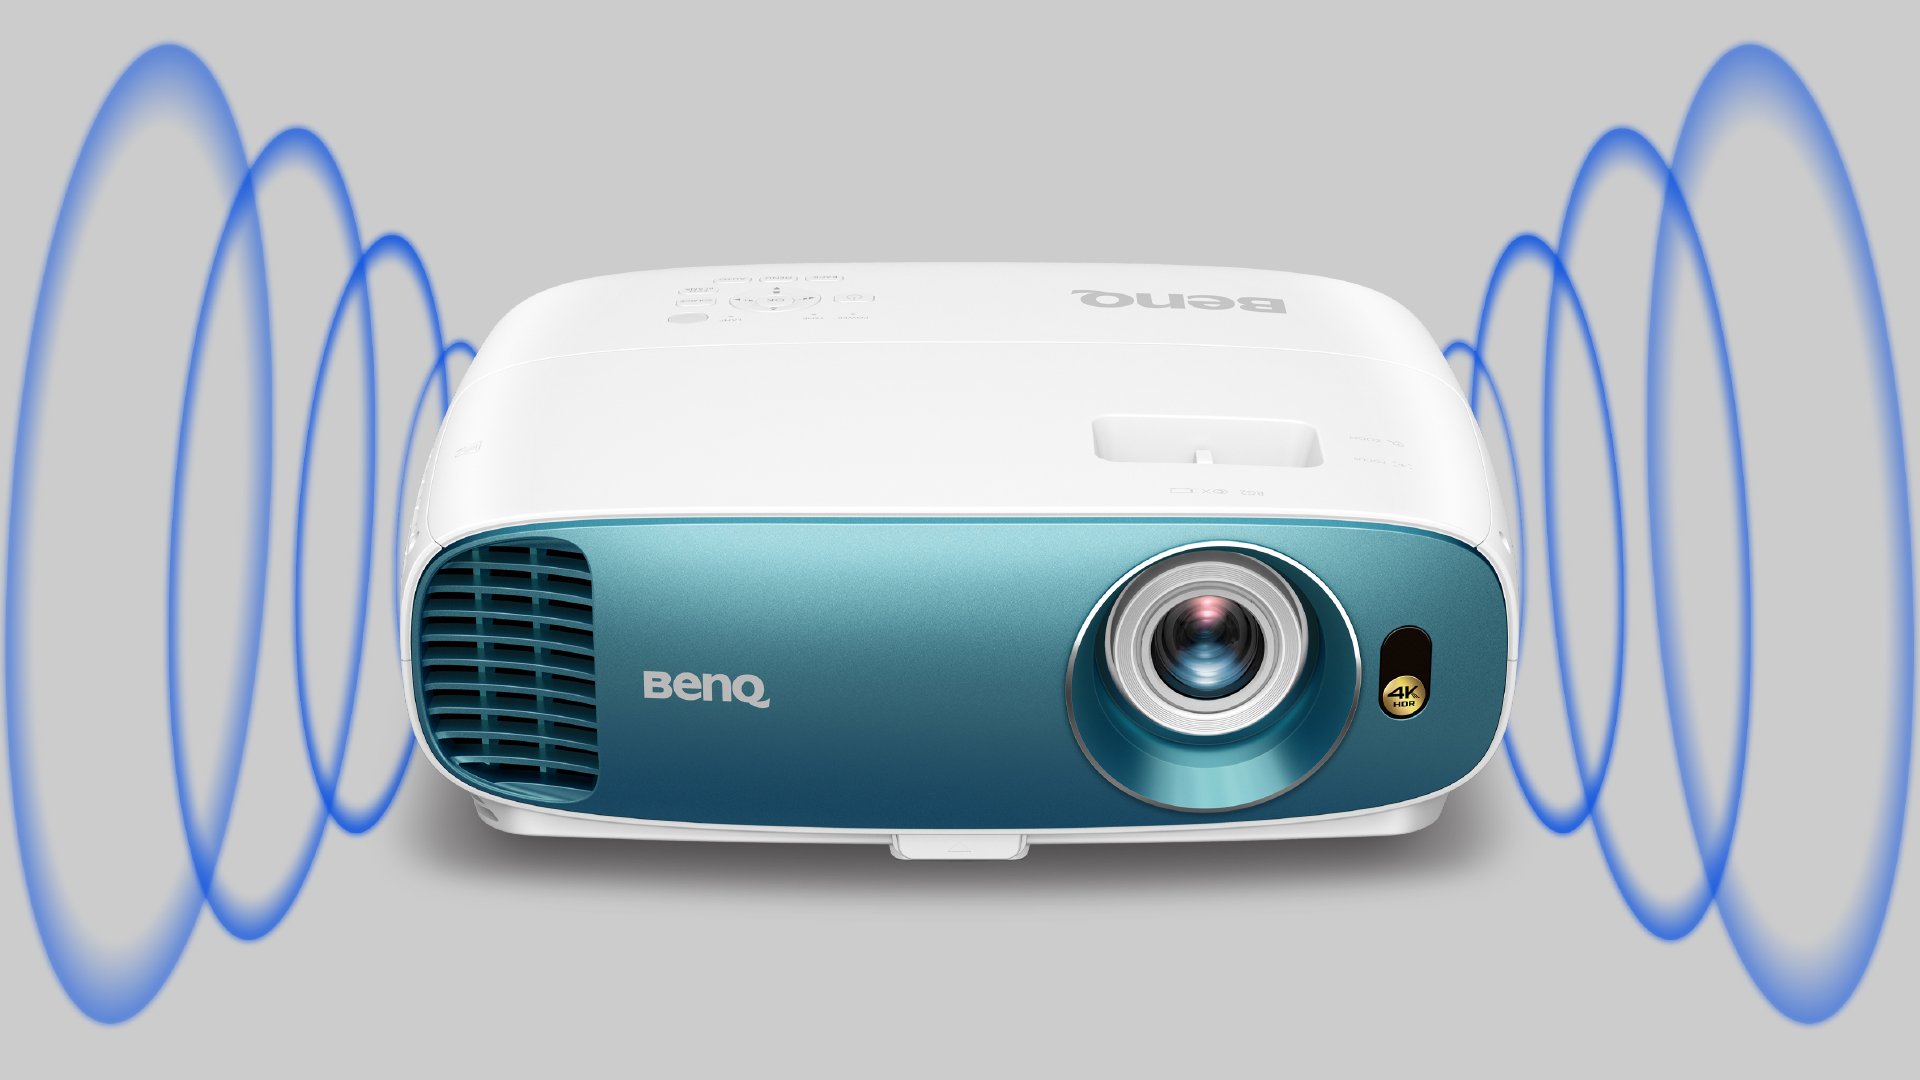 The 5Wx2 chambered speakers of BenQ projector